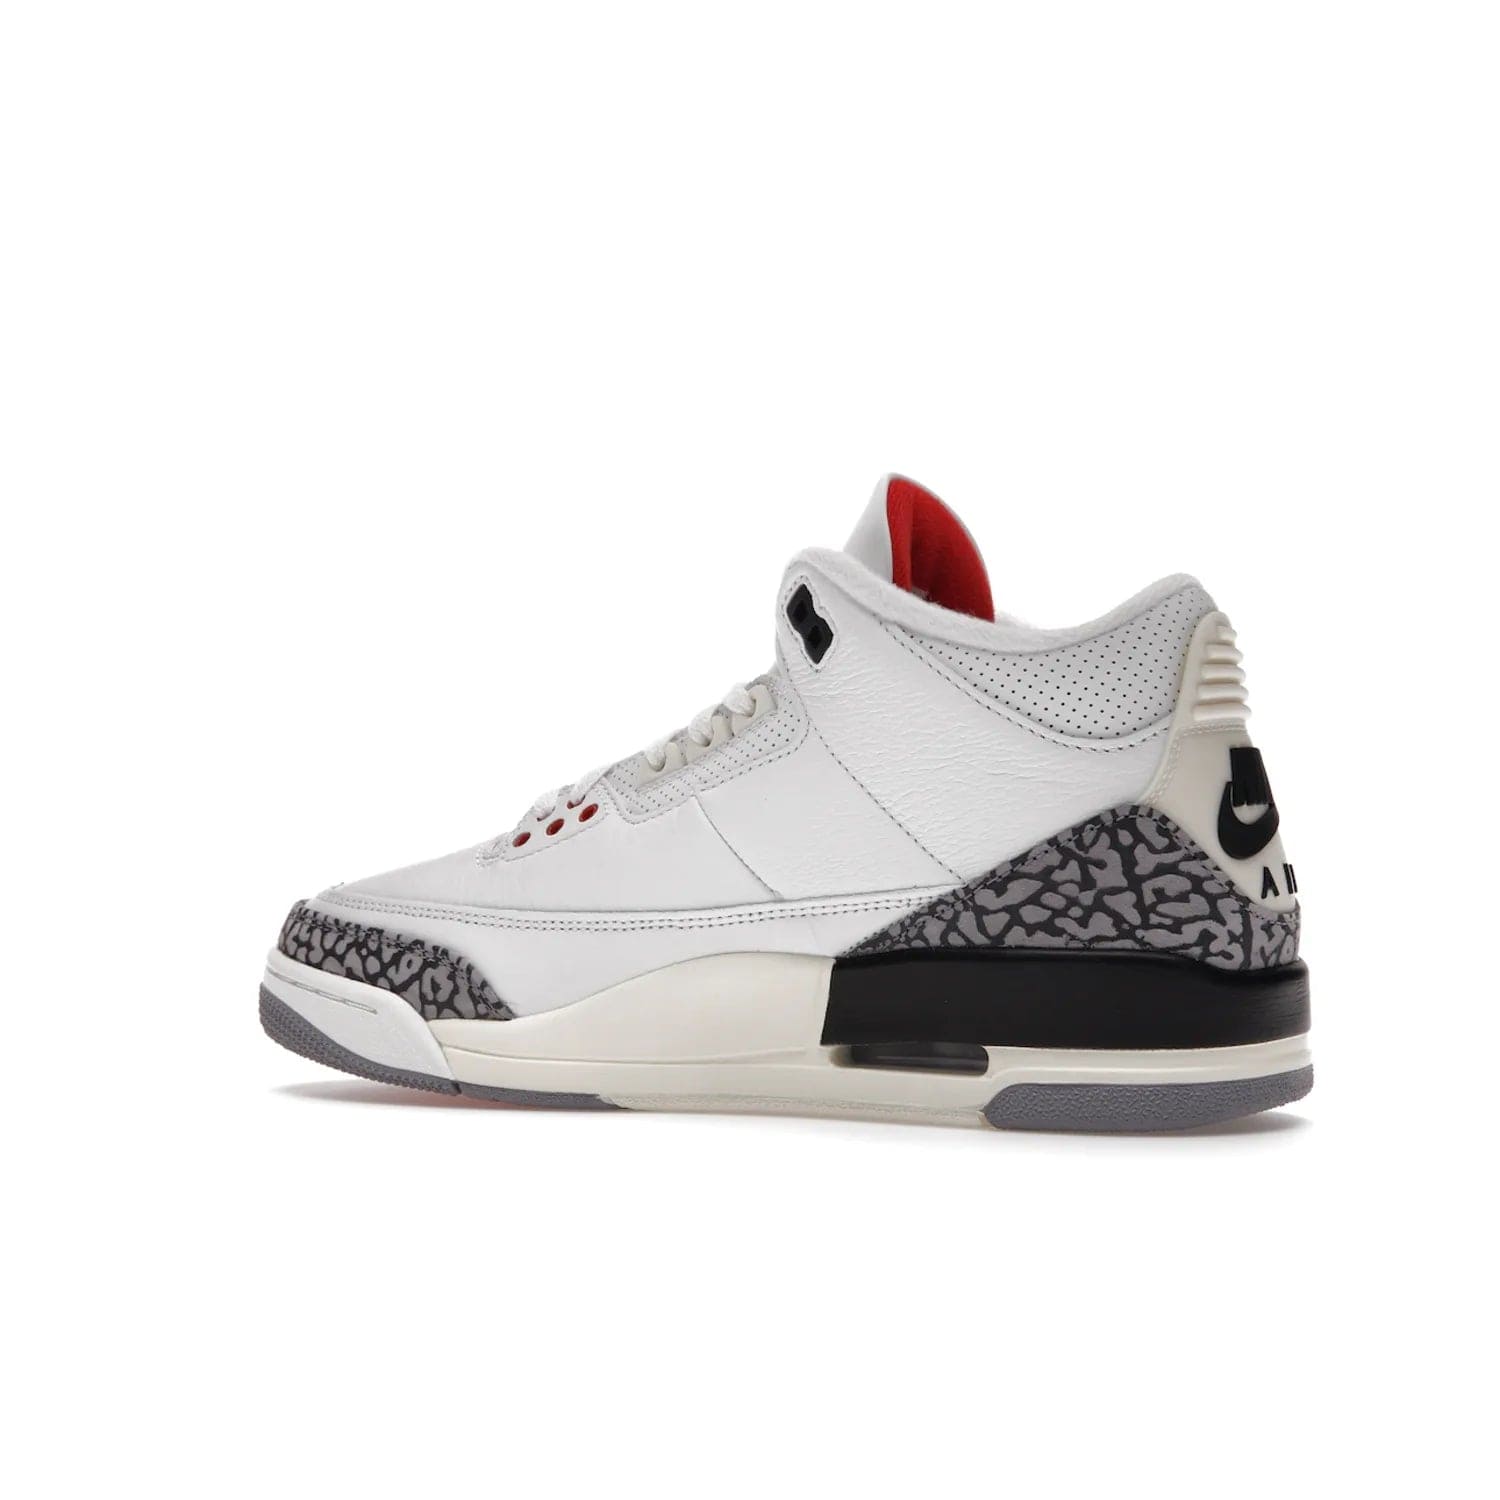 Jordan 3 Retro White Cement Reimagined - Image 22 - Only at www.BallersClubKickz.com - The Reimagined Air Jordan 3 Retro in a Summit White/Fire Red/Black/Cement Grey colorway is launching on March 11, 2023. Featuring a white leather upper, off-white midsoles and heel tabs, this vintage-look sneaker is a must-have.